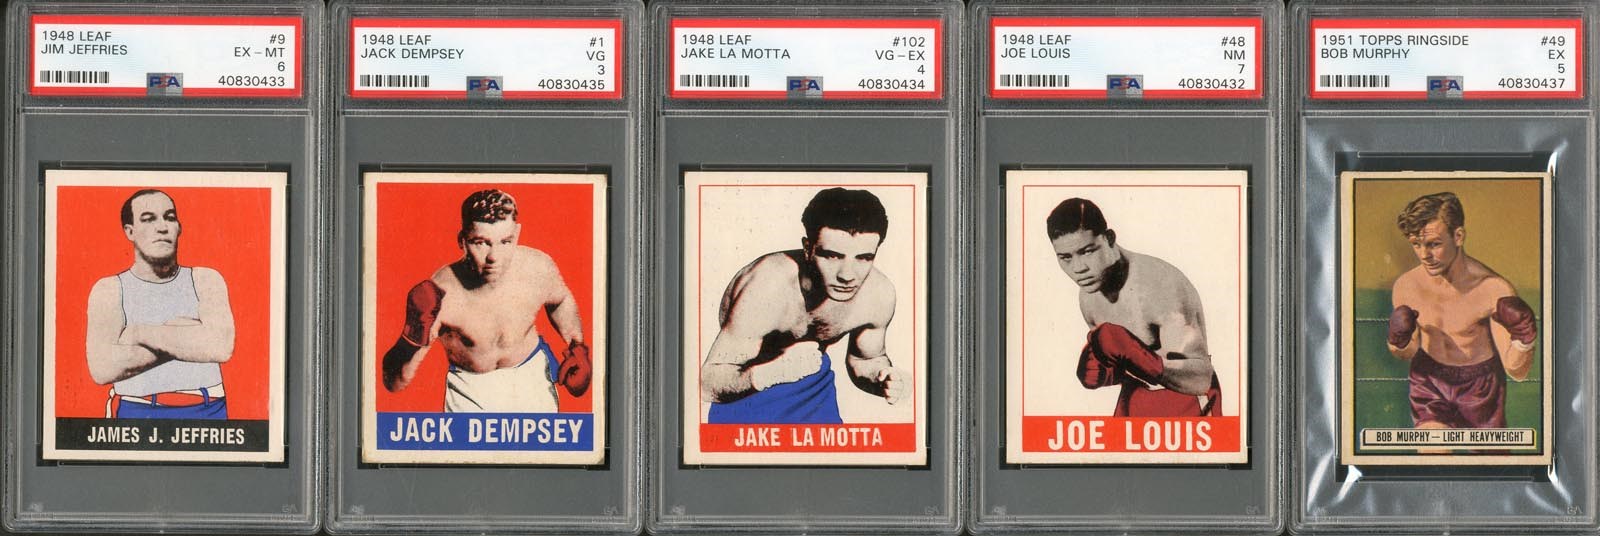 Muhammad Ali & Boxing - 1948 Leaf and 1951 Topps Ringside Boxing PSA Lot with Champions (5)